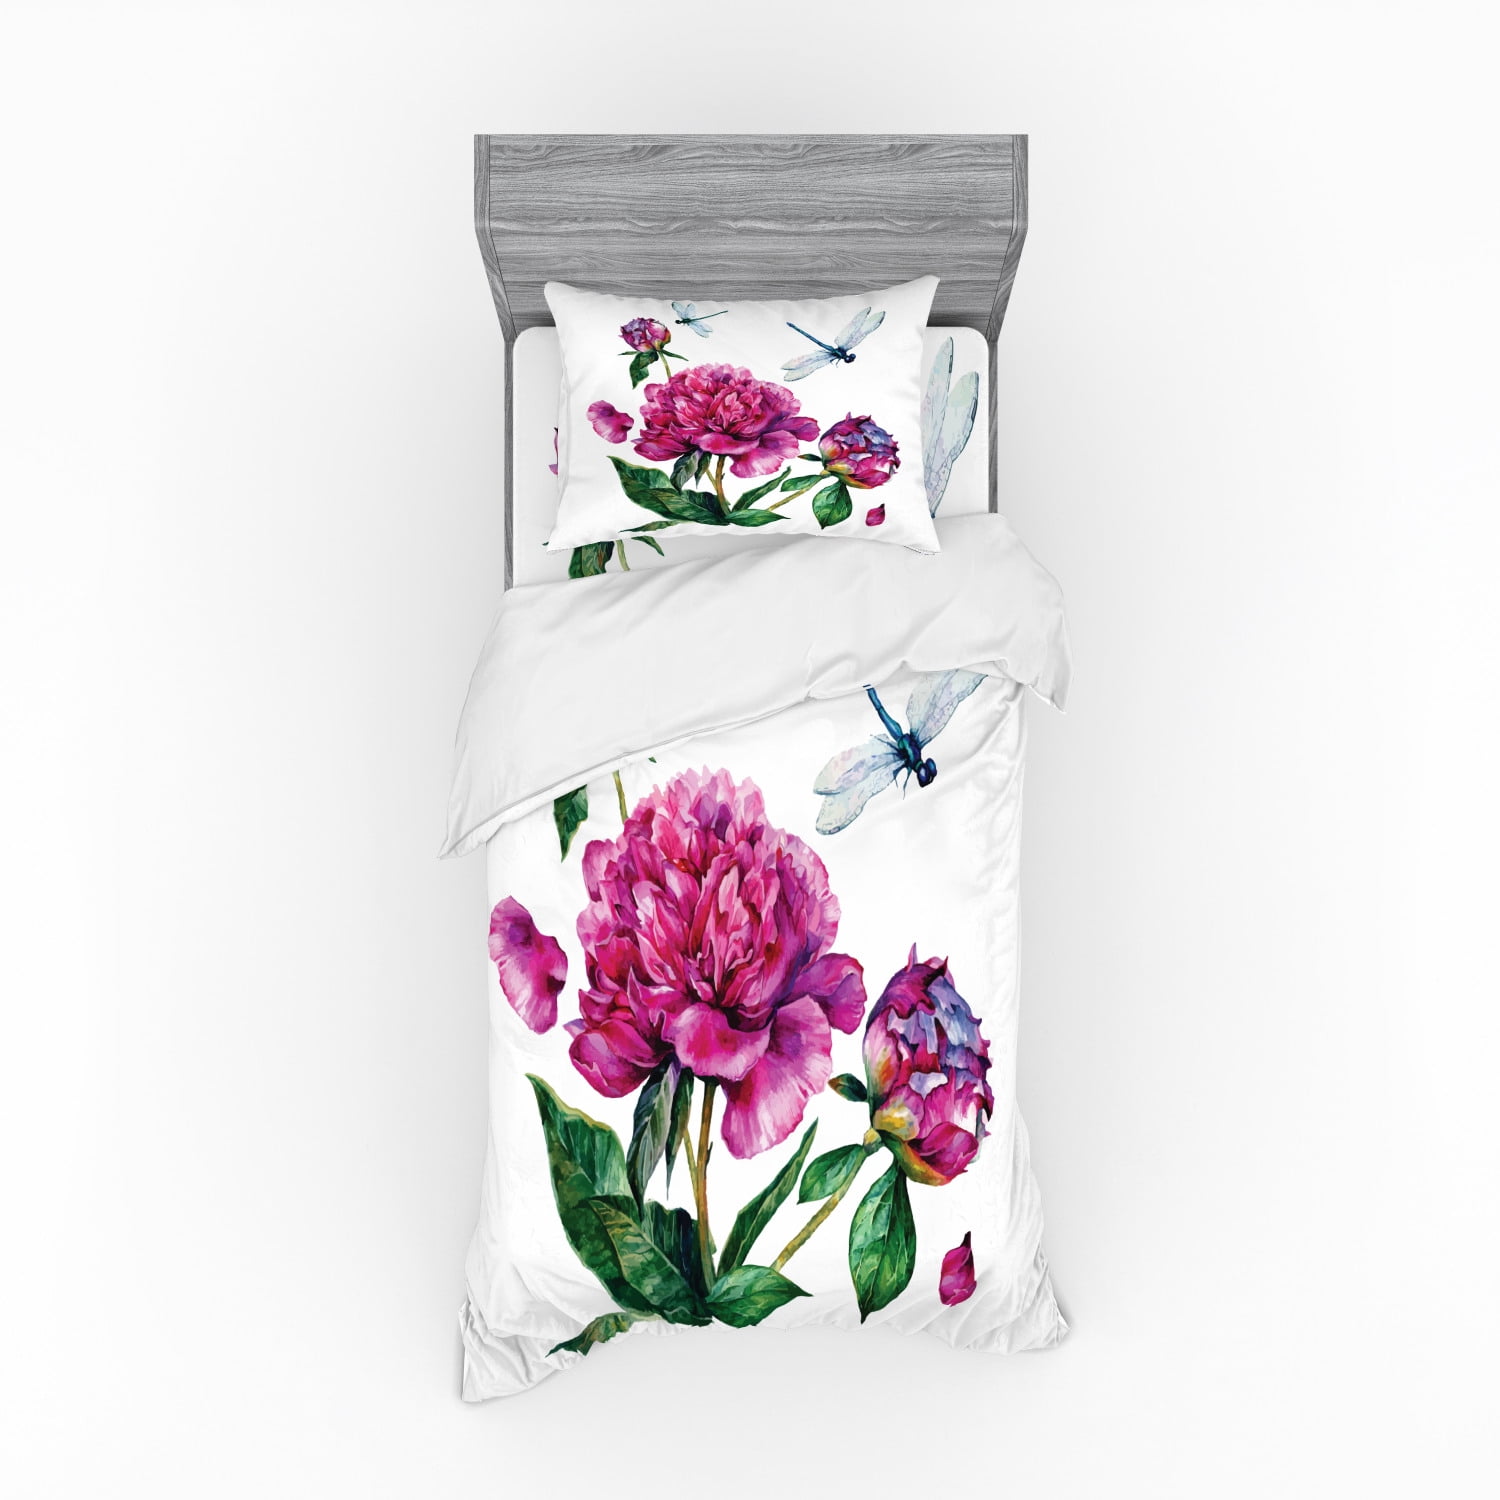 Flower Duvet Cover Set Watercolor Peonies And Dragonflies